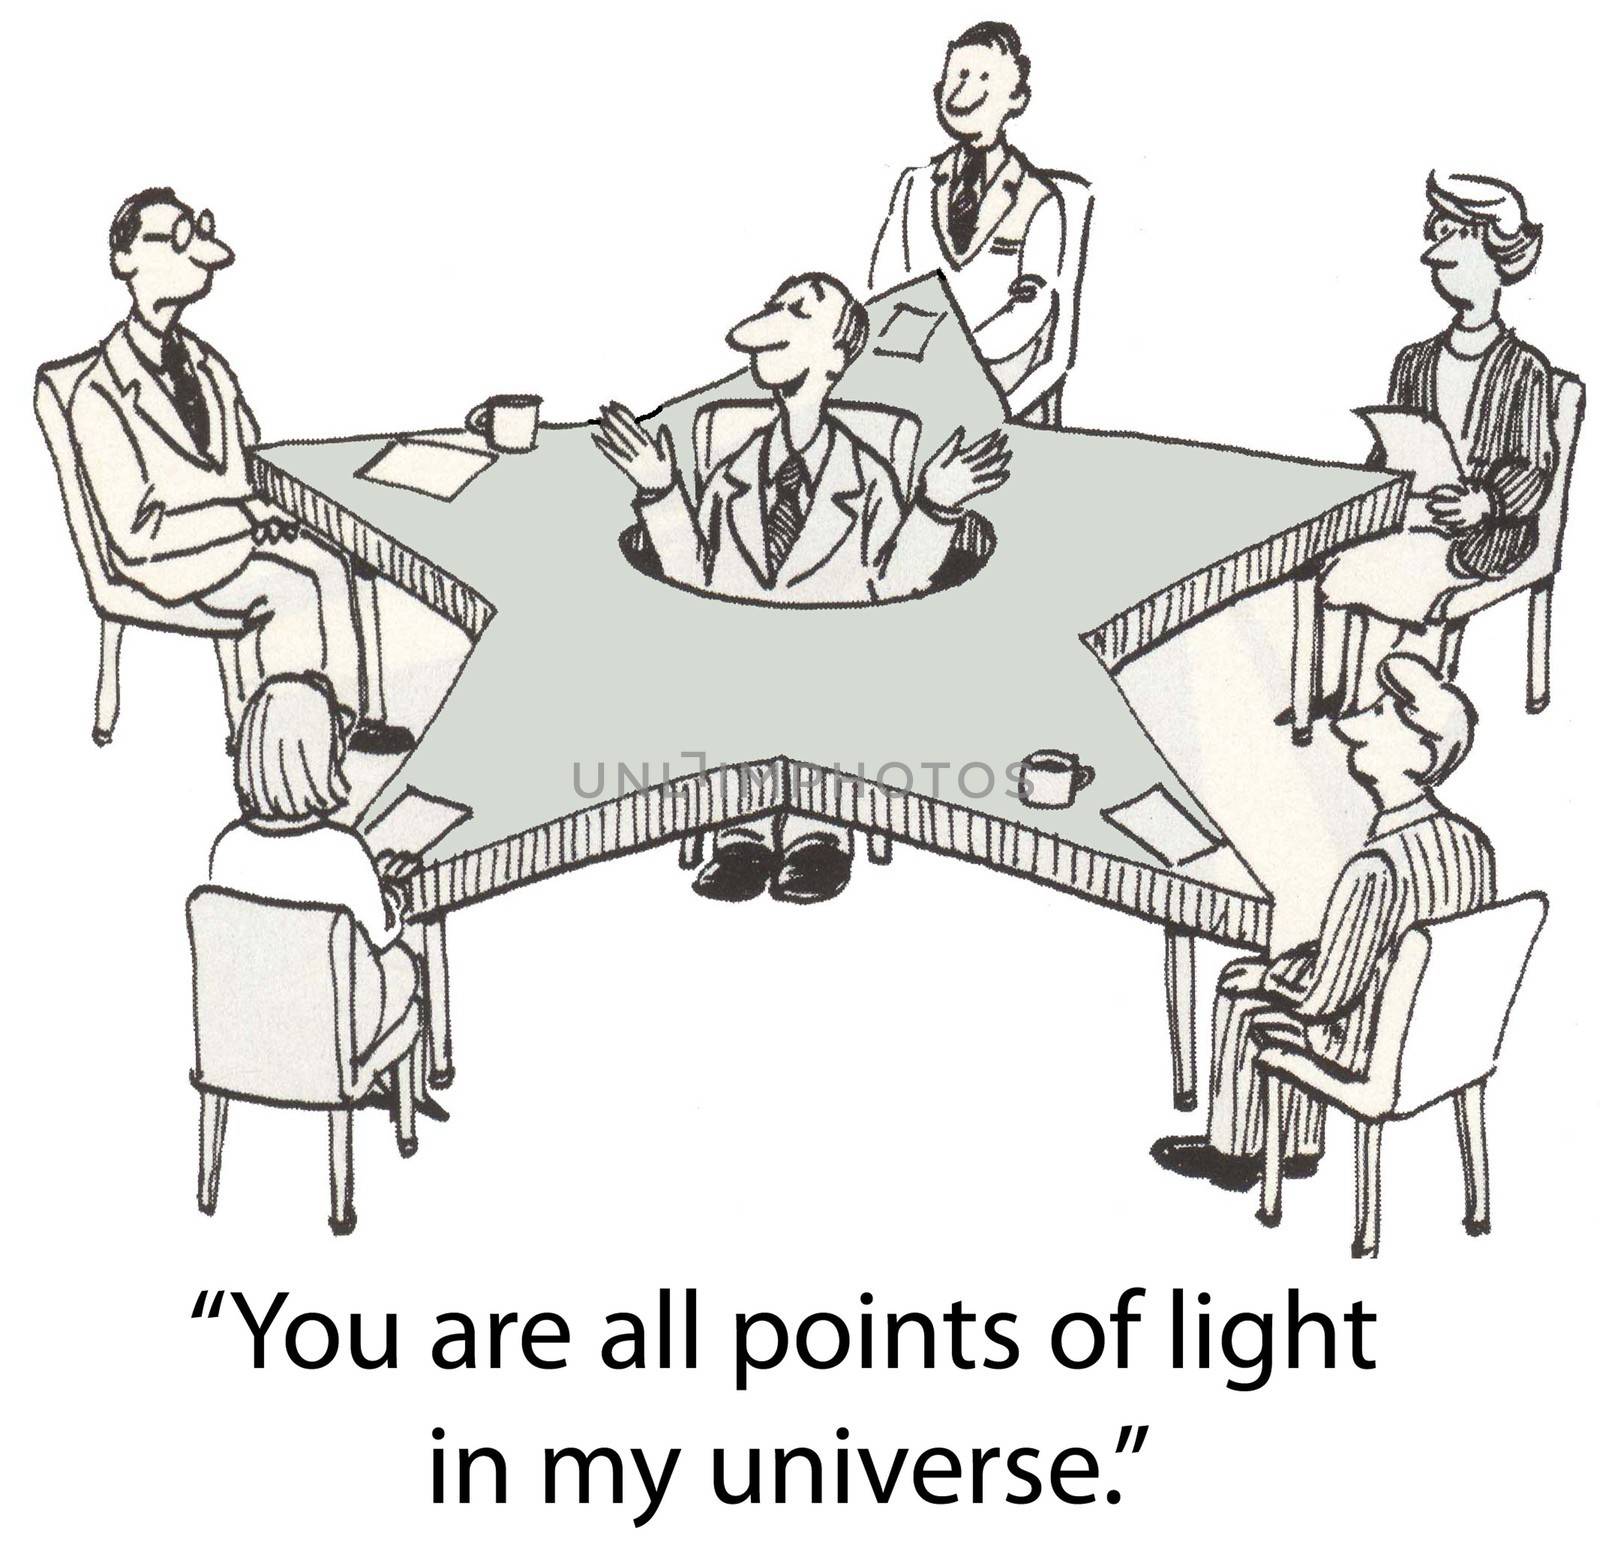 "You are all points of light in my universe."